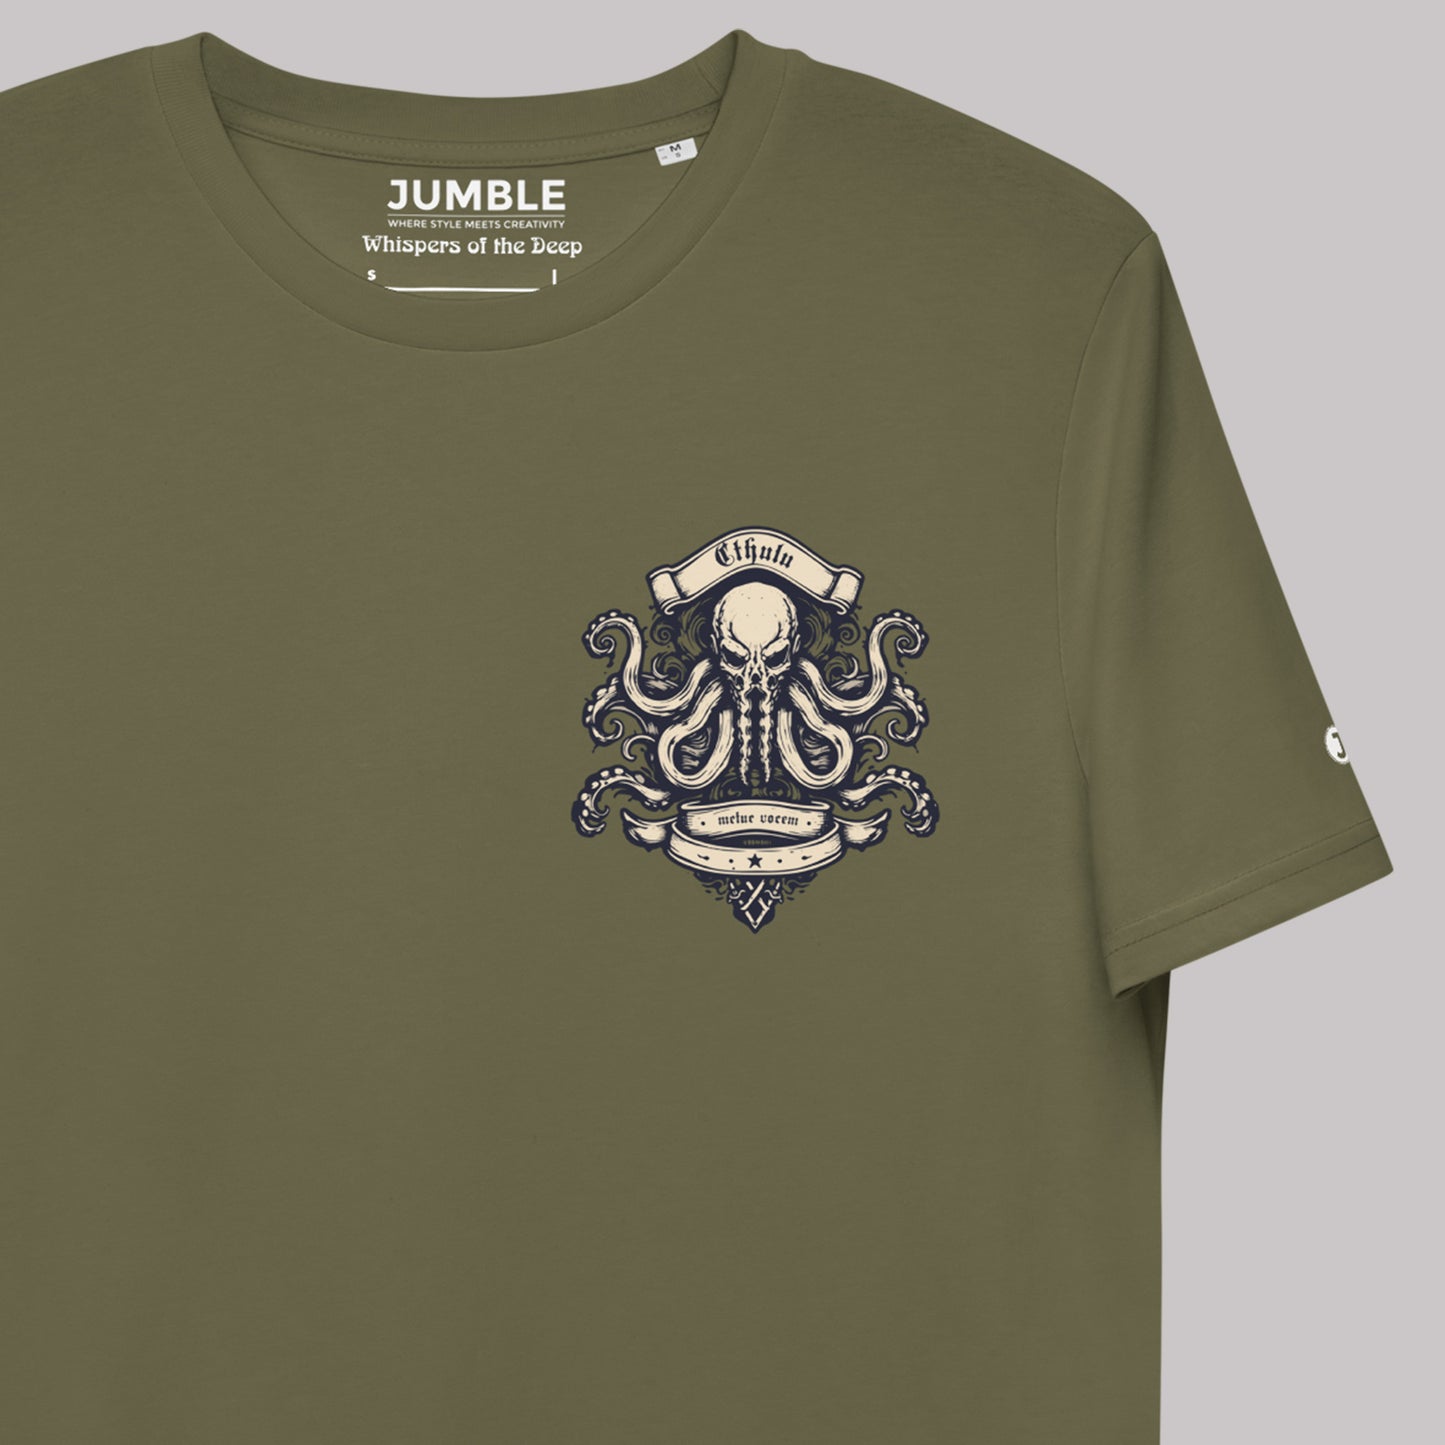 closeup of design on Whispers of the Deep Unisex organic cotton t-shirt in khaki